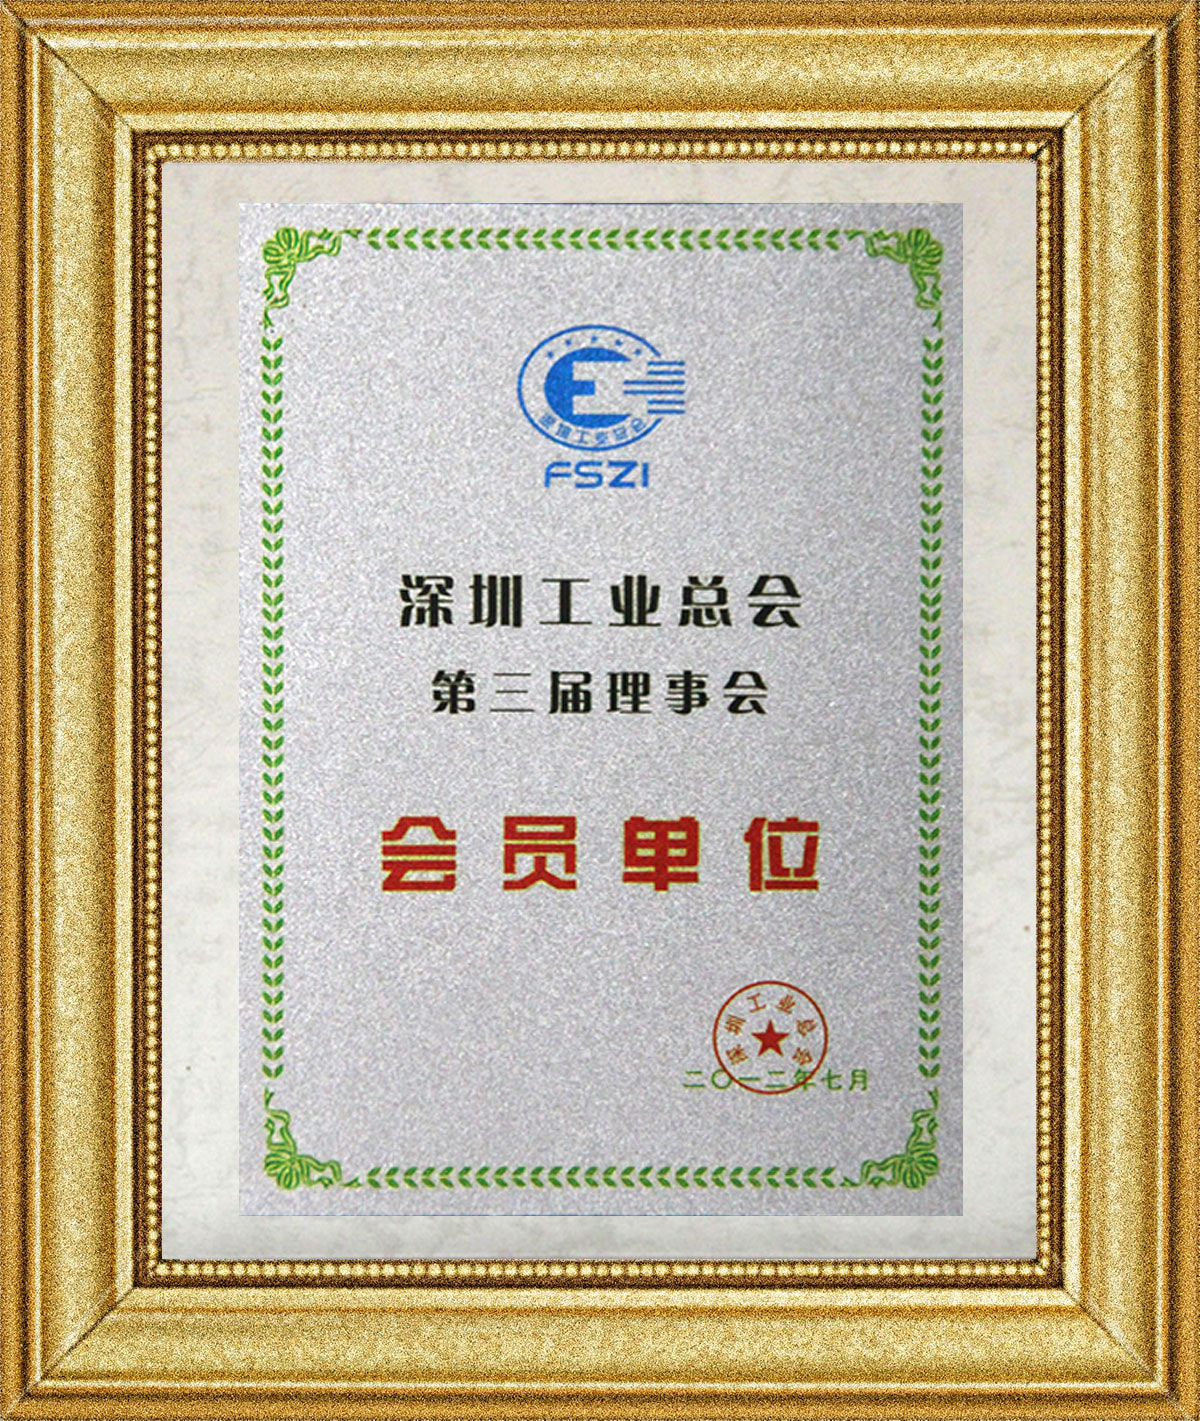 The Third Council of Shenzhen Federation of Industry